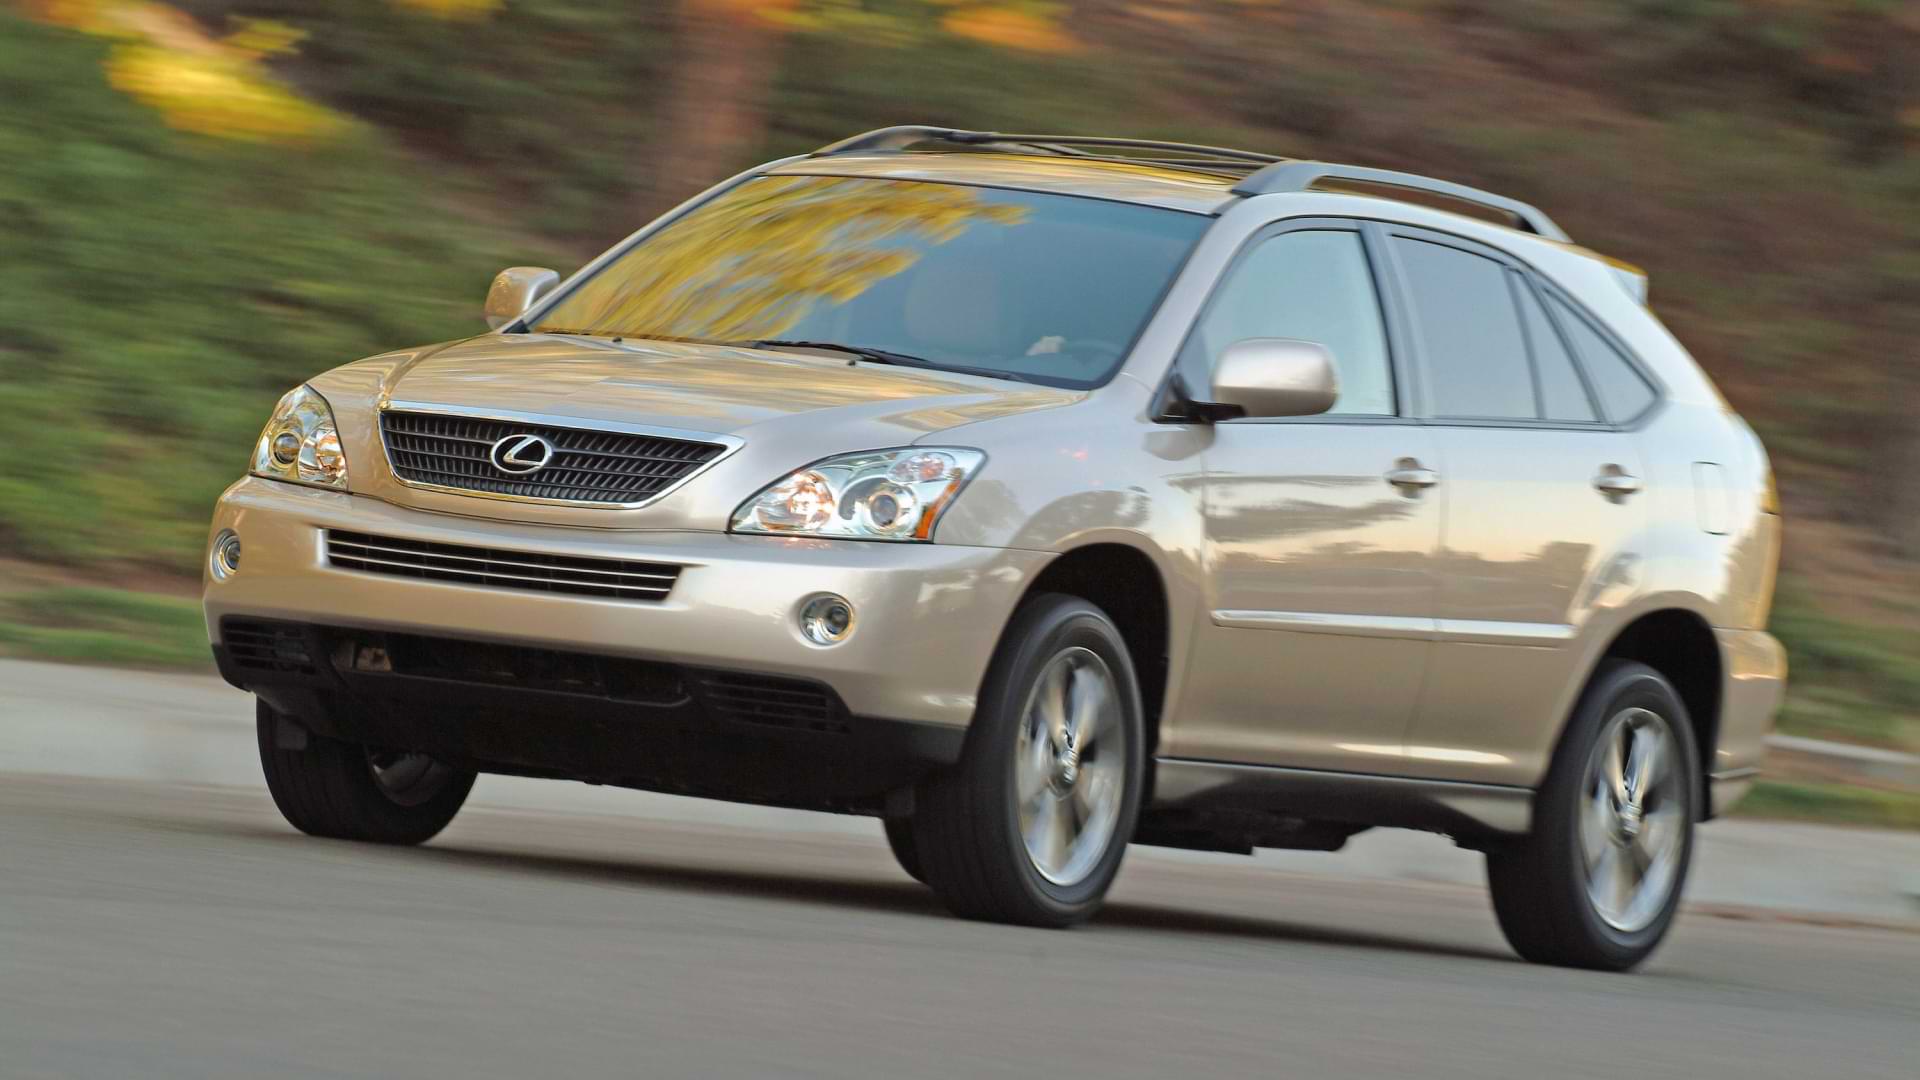 The world's first electrified luxury crossover, the Lexus RX hybrid - a gold RX Hybrid drives at speed, trees in the background.